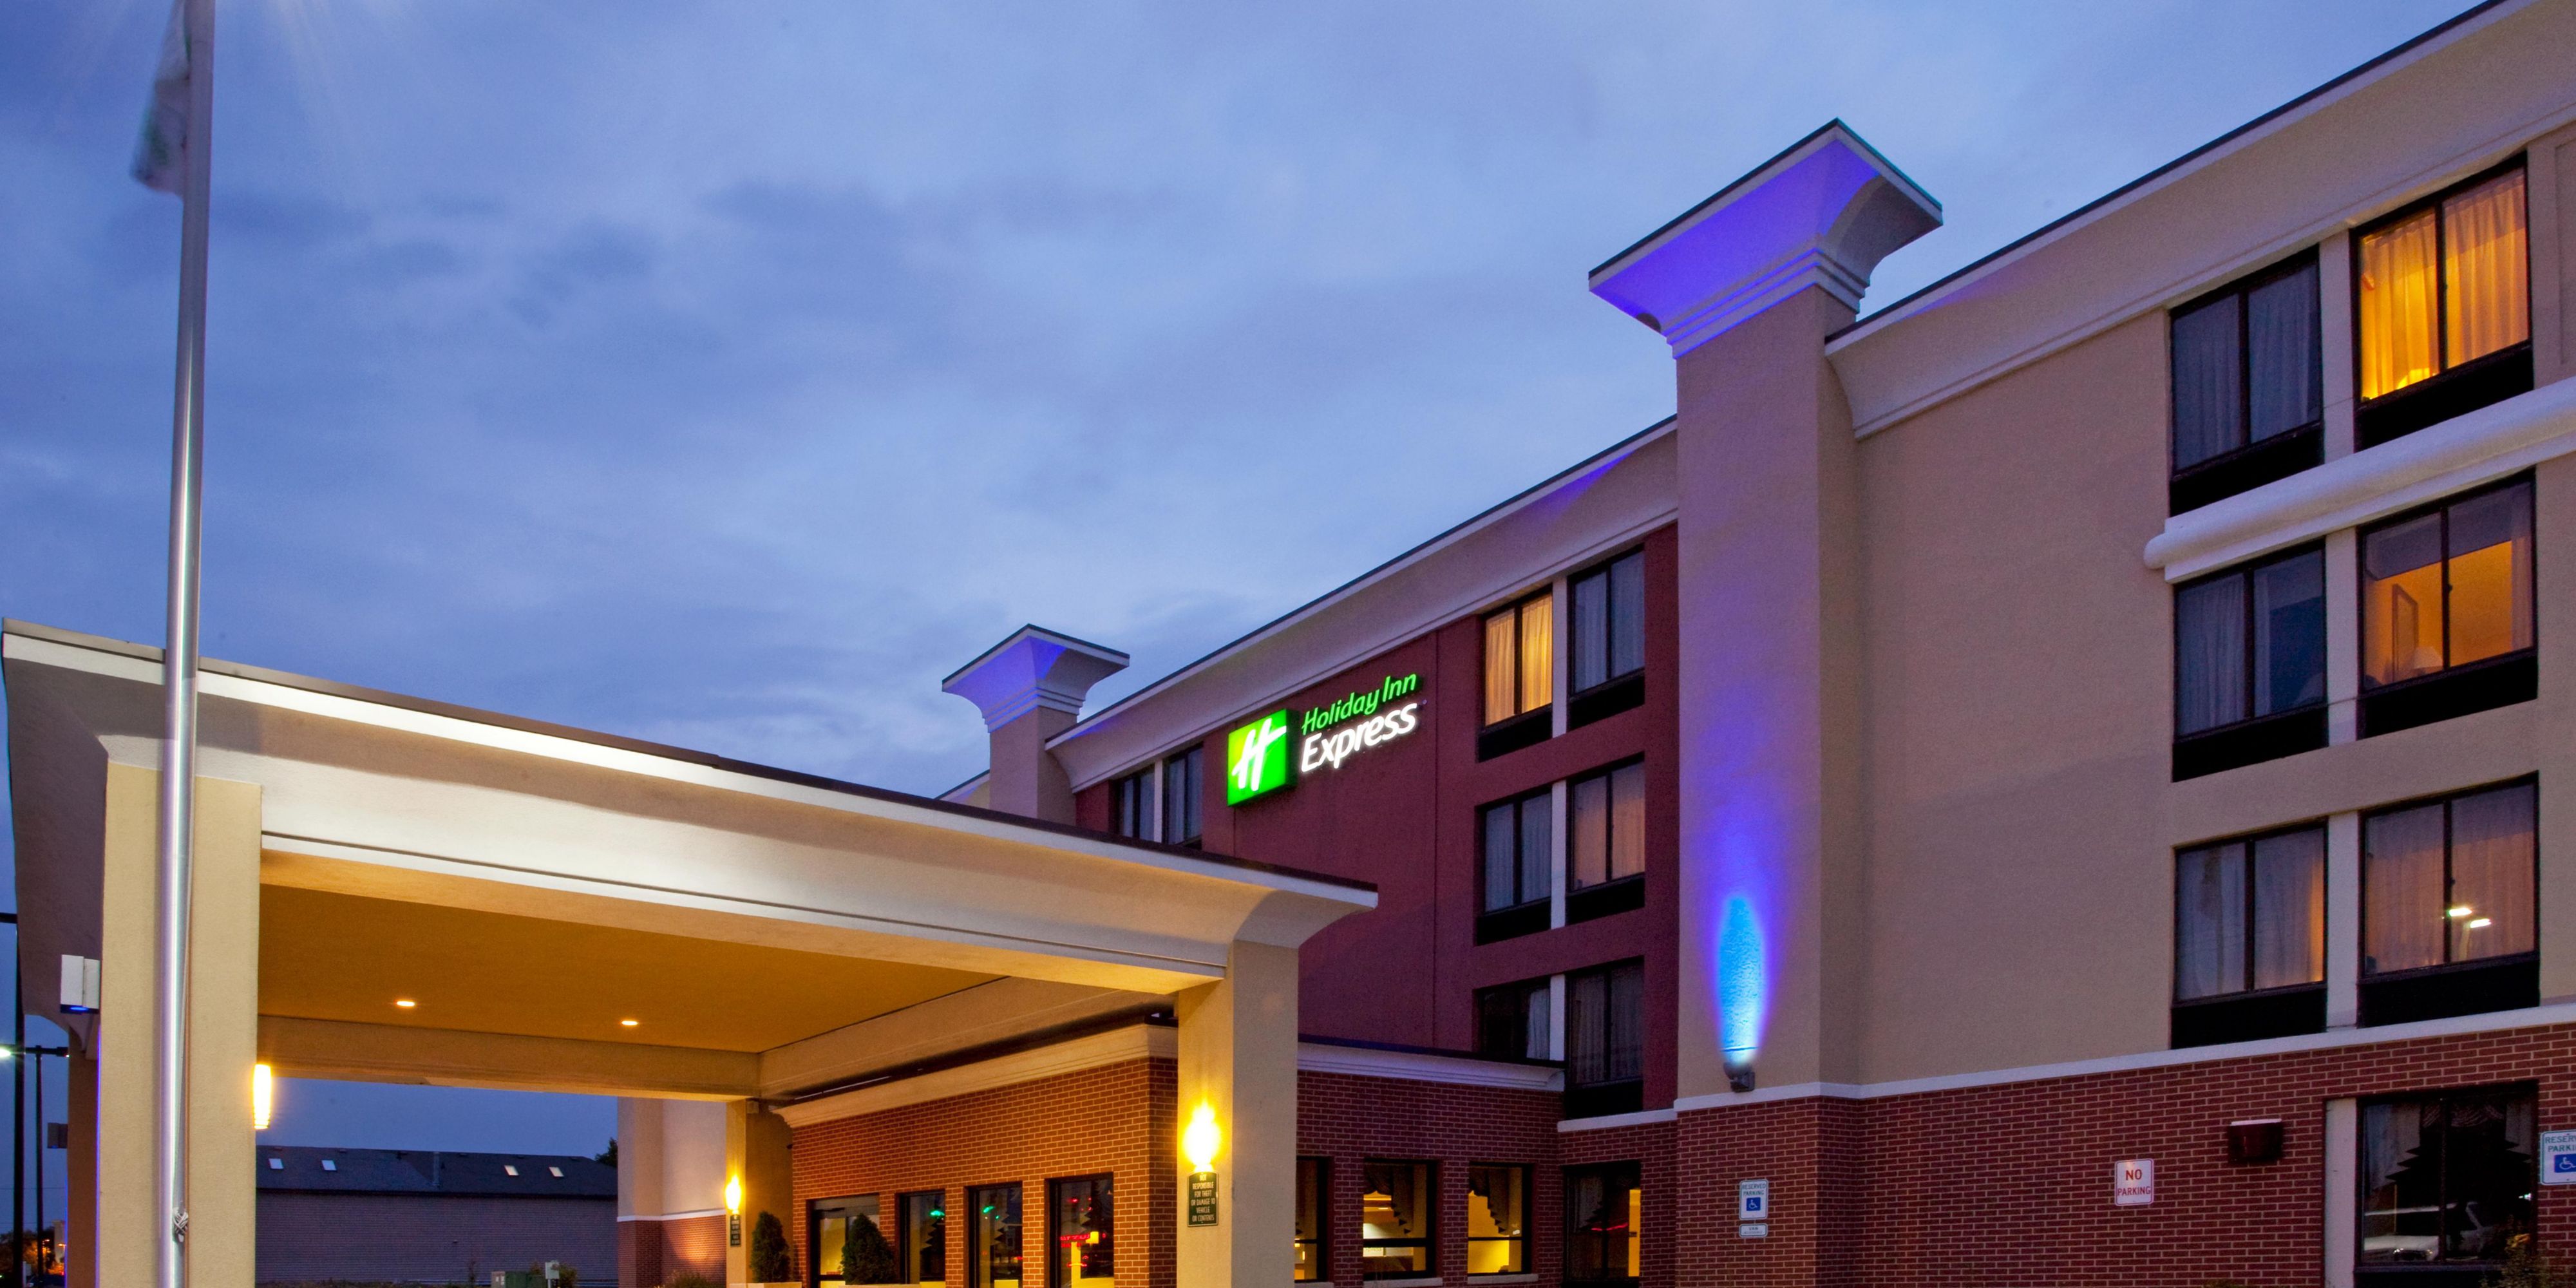 The Holiday Inn Express Rochester Greece is only 2.2 miles from the Kodak Center.  Enjoy the best in music, comedy, and other events at this very special venue!